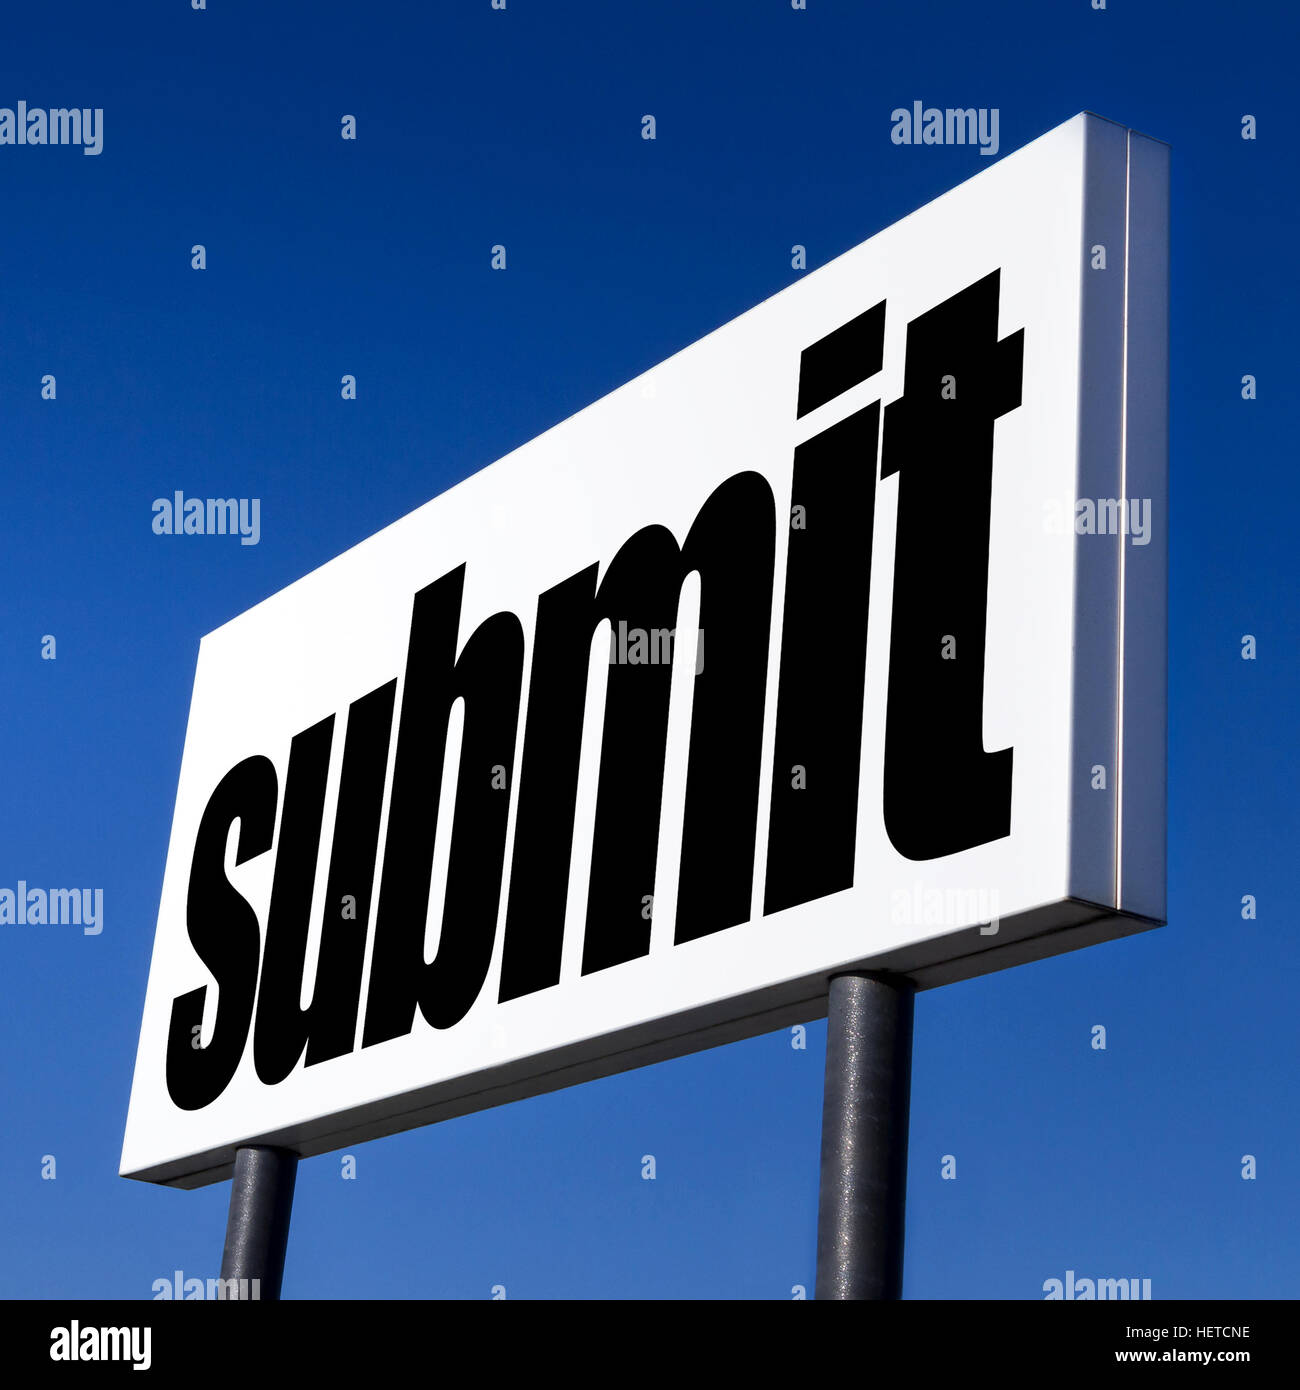 Horizontal billboard with the order to submit, against unreal blue sky. Abstract concept of consumerism, human mind control, power of corporations Stock Photo